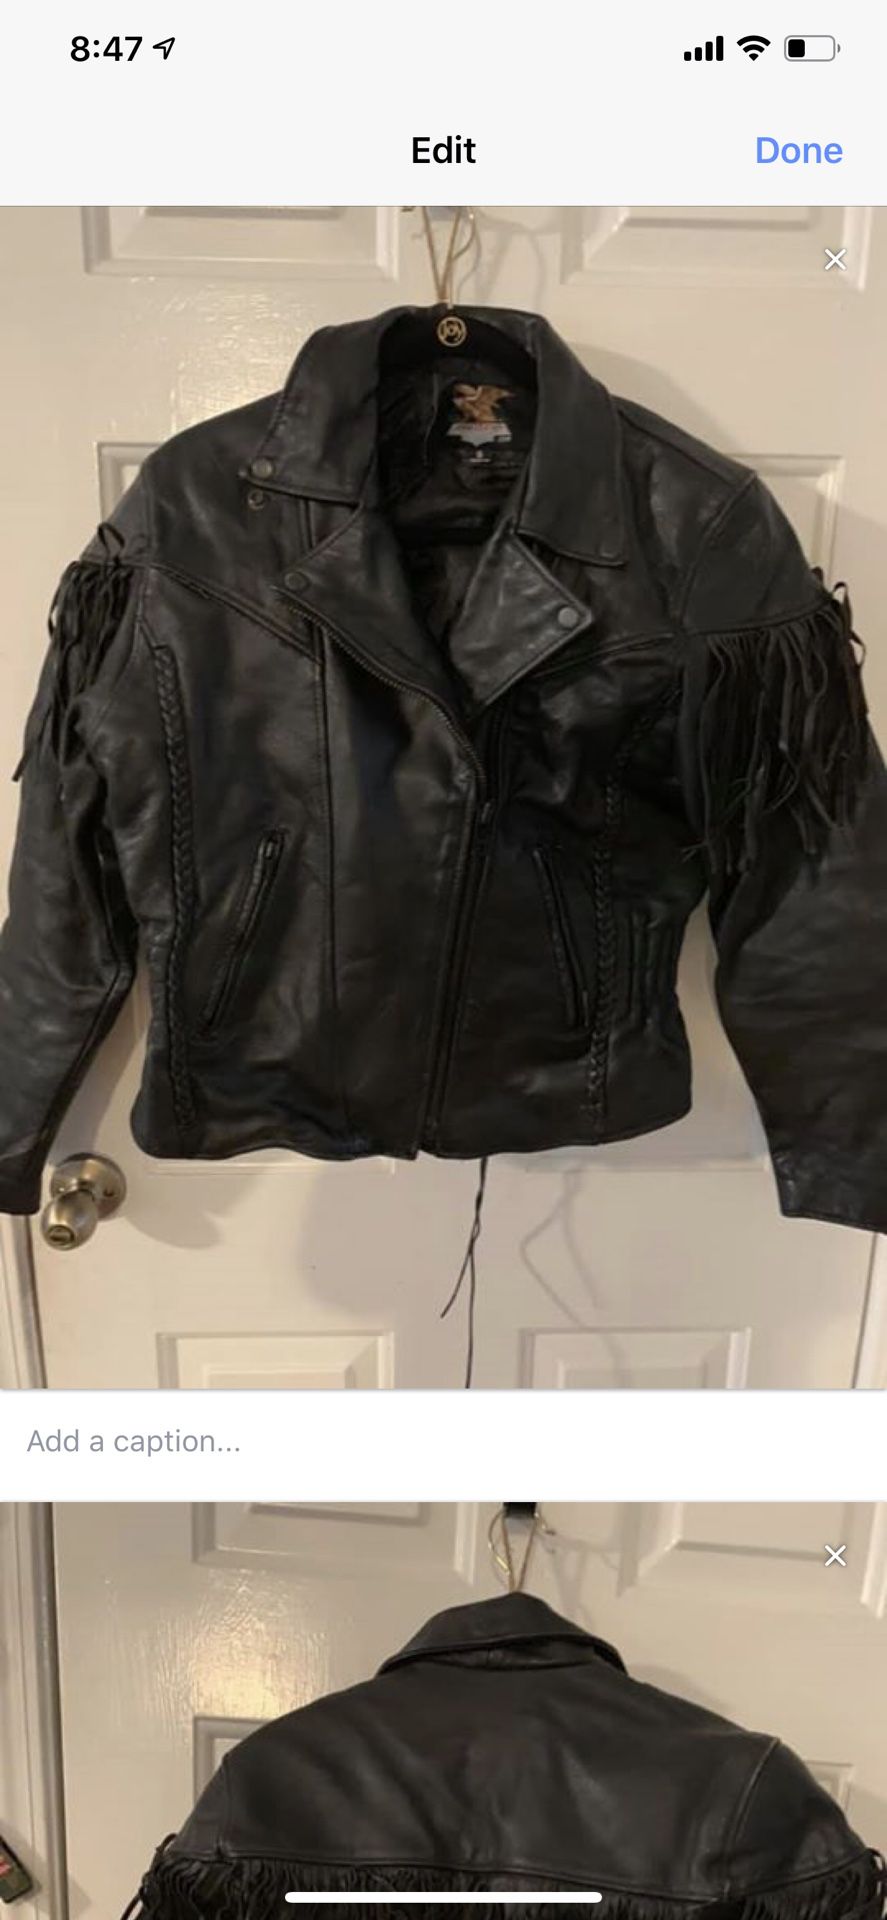 Women’s leather motorcycle jacket and chaps